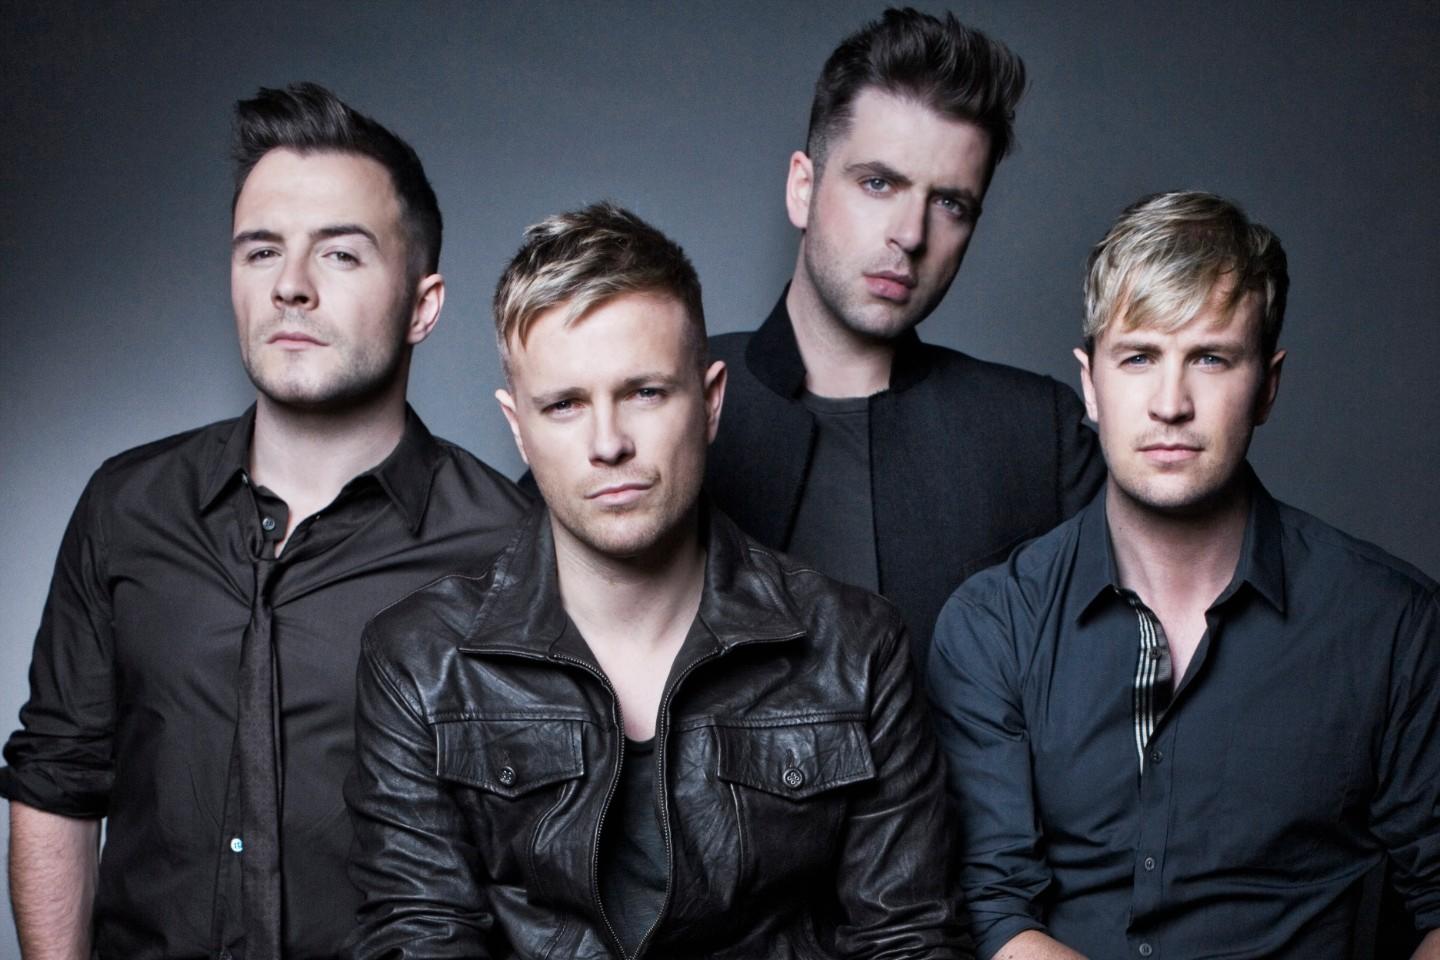 Westlife - The Wild Dreams Tour at Motorpoint Arena Nottingham Tickets